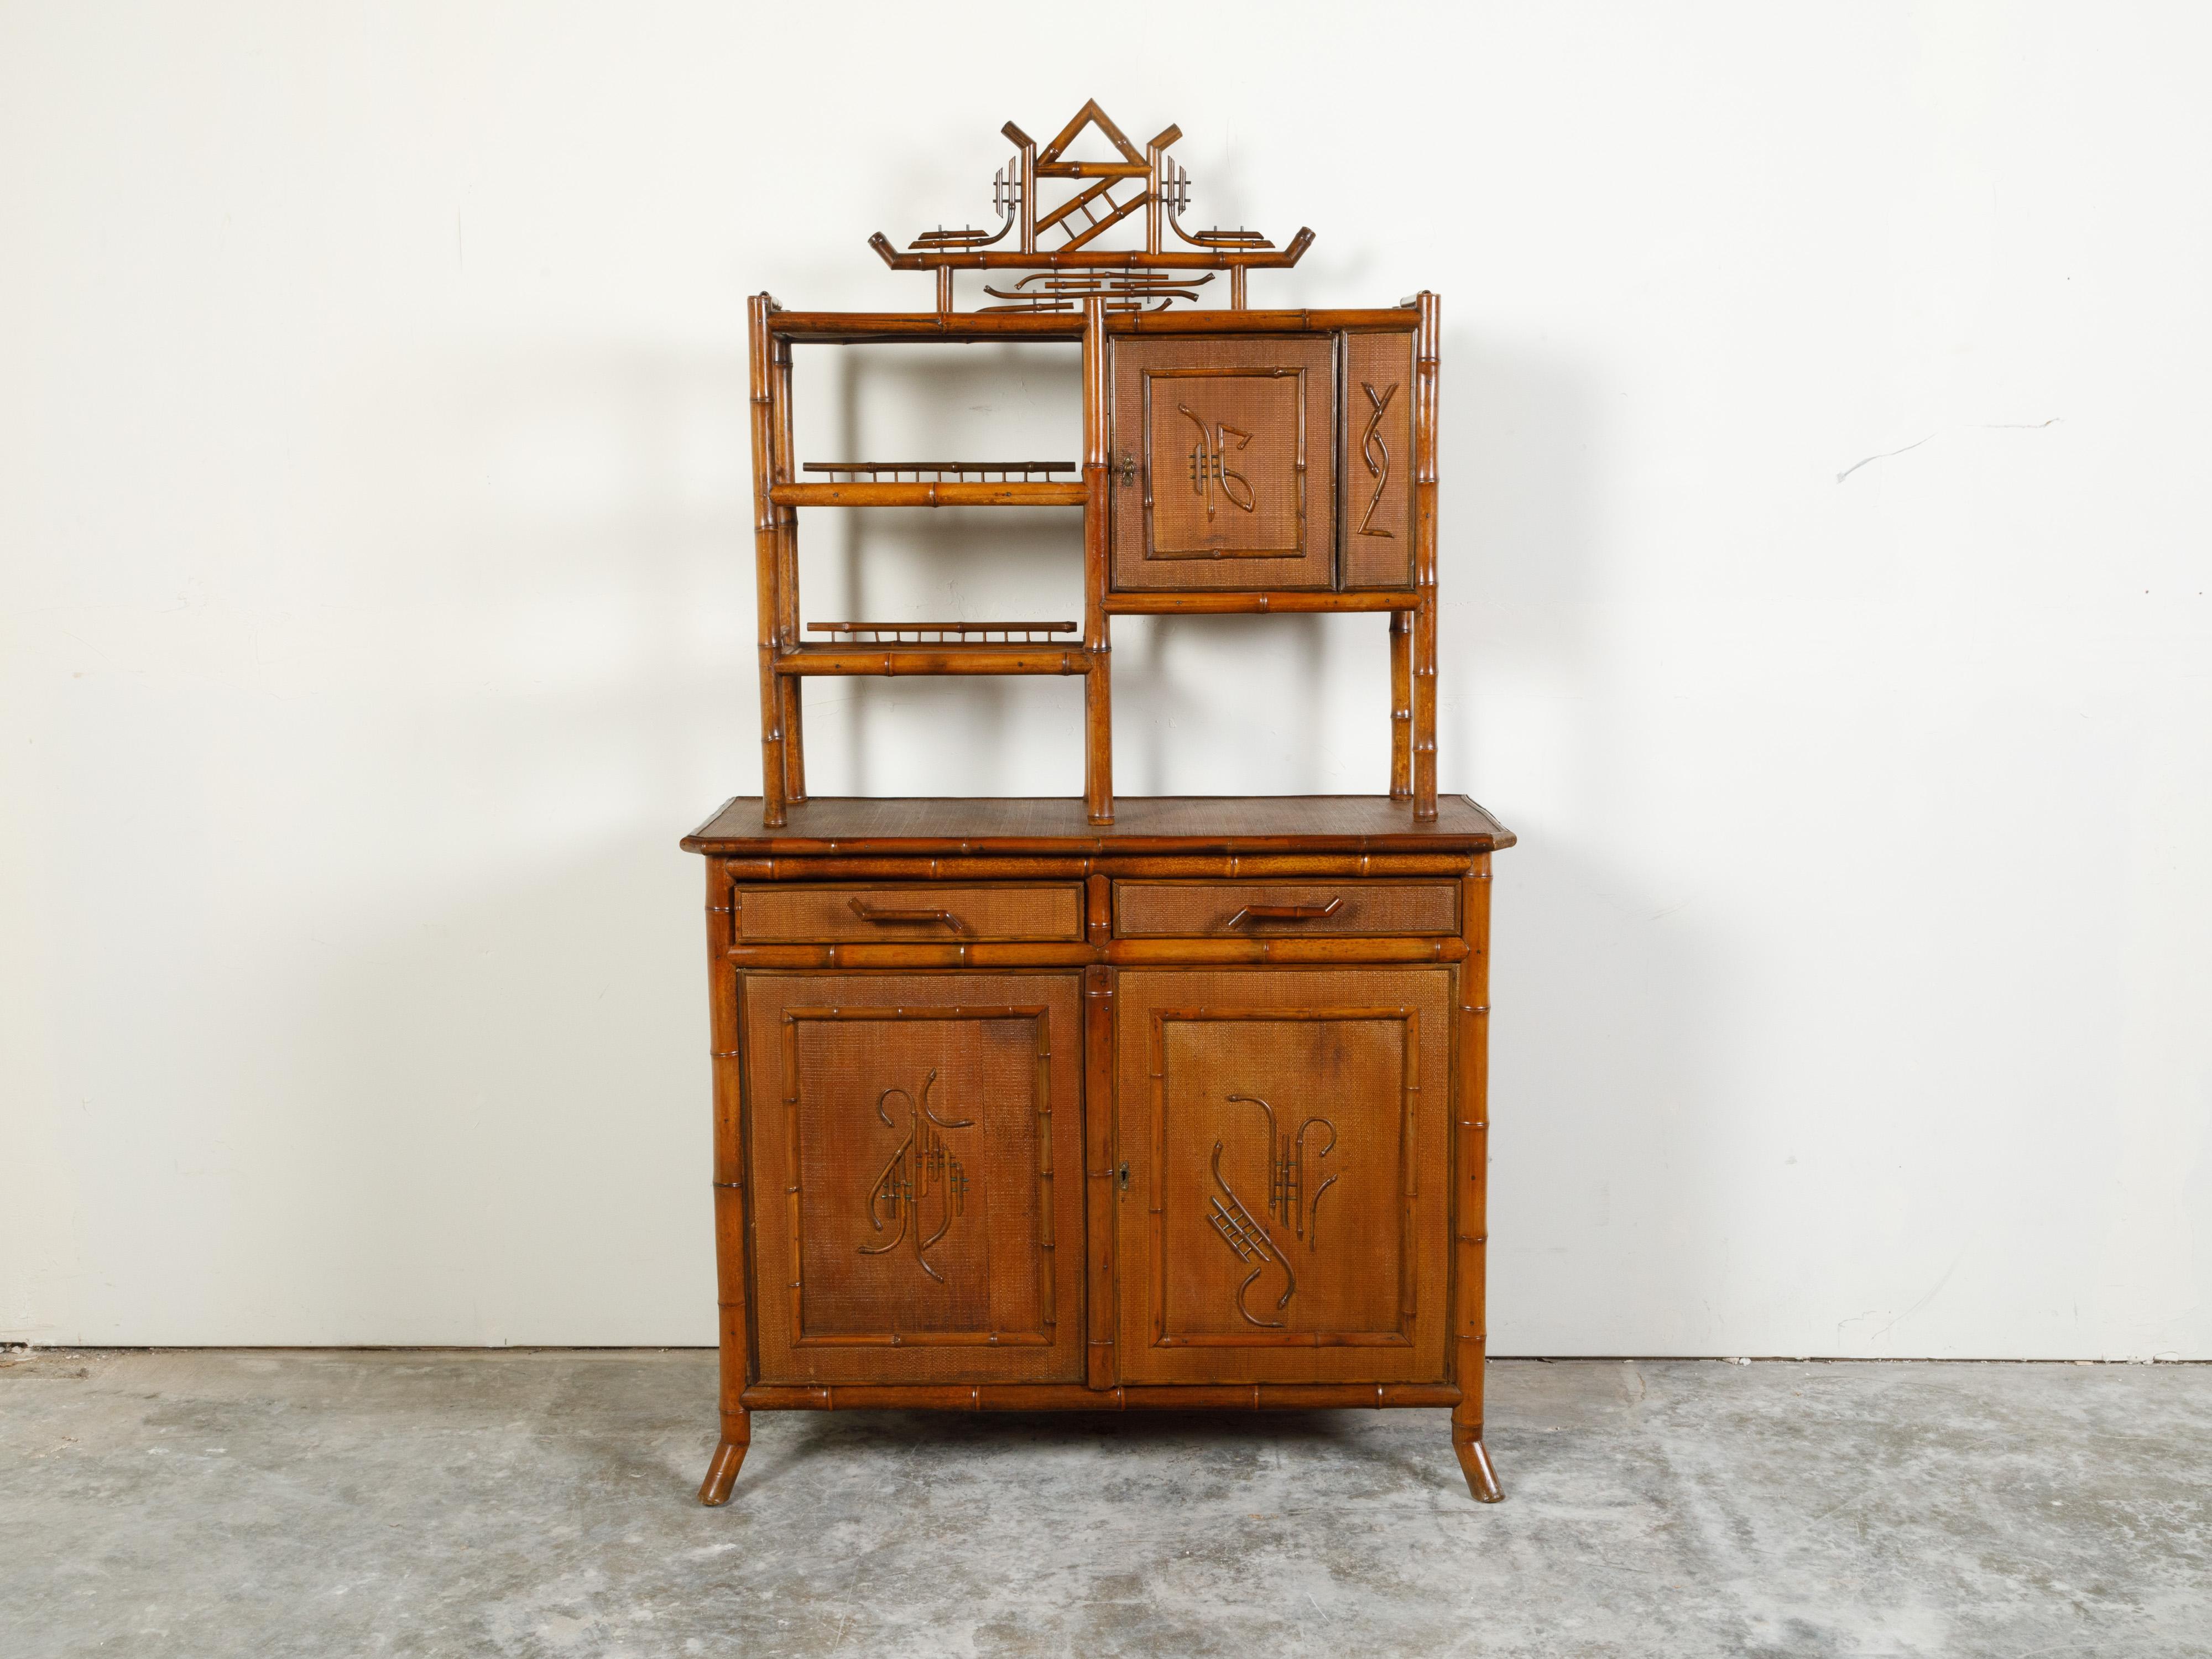 An English bamboo cabinet from the early 20th century, with Chinoiserie motifs, open shelves and lower buffet. Created in England during the early years of the 20th century, this bamboo cabinet features open shelves and a single door in the upper